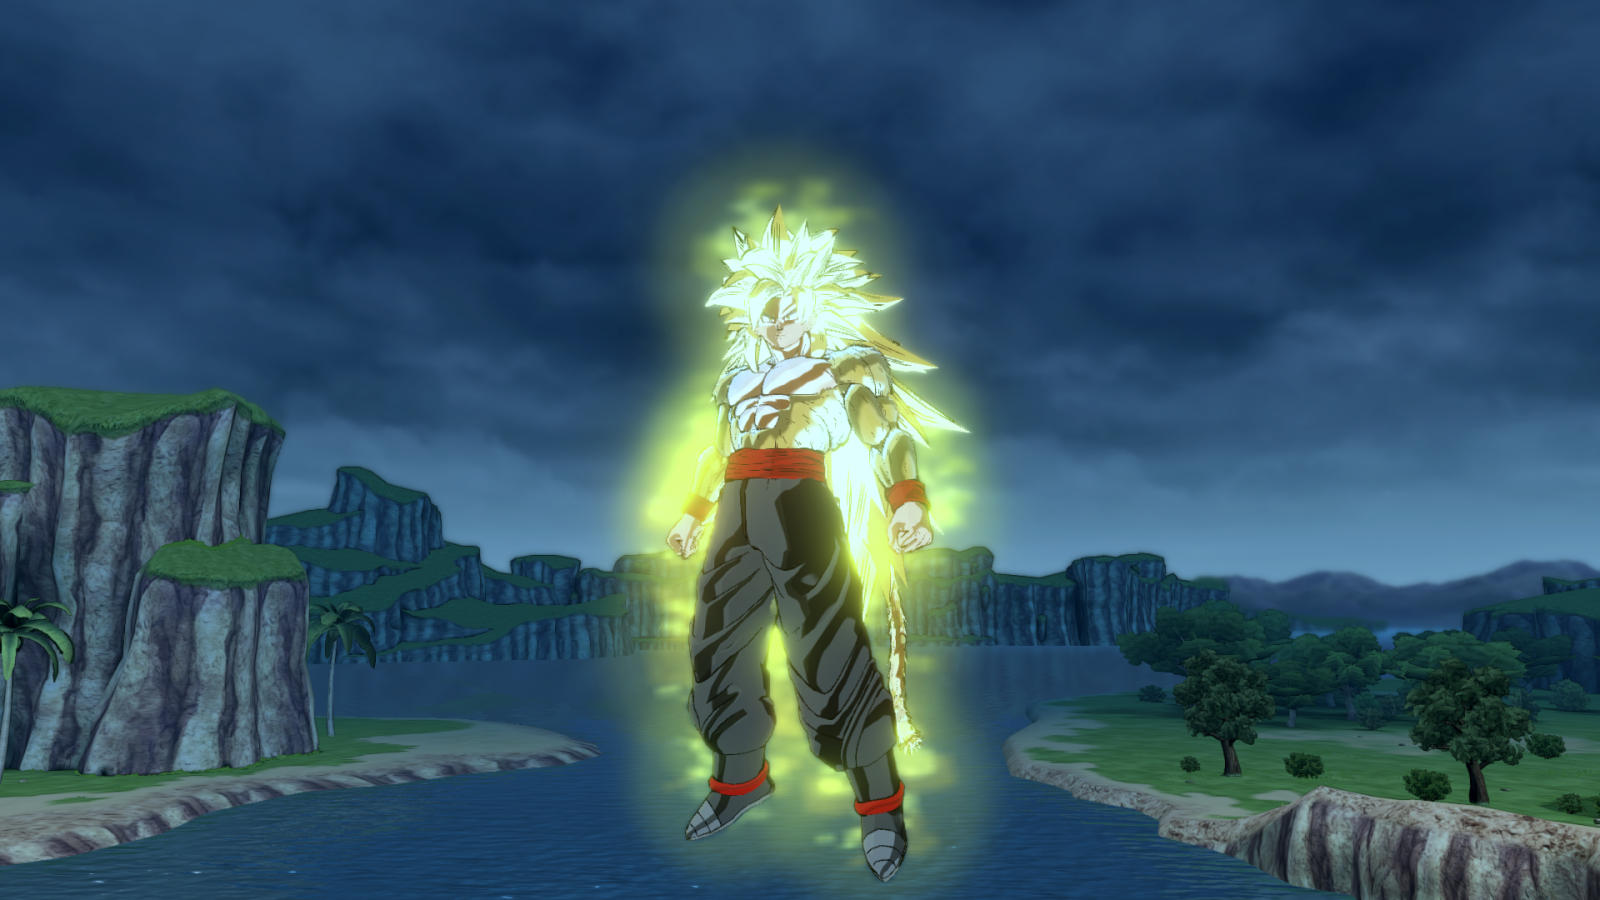 is there a super saiyan 6